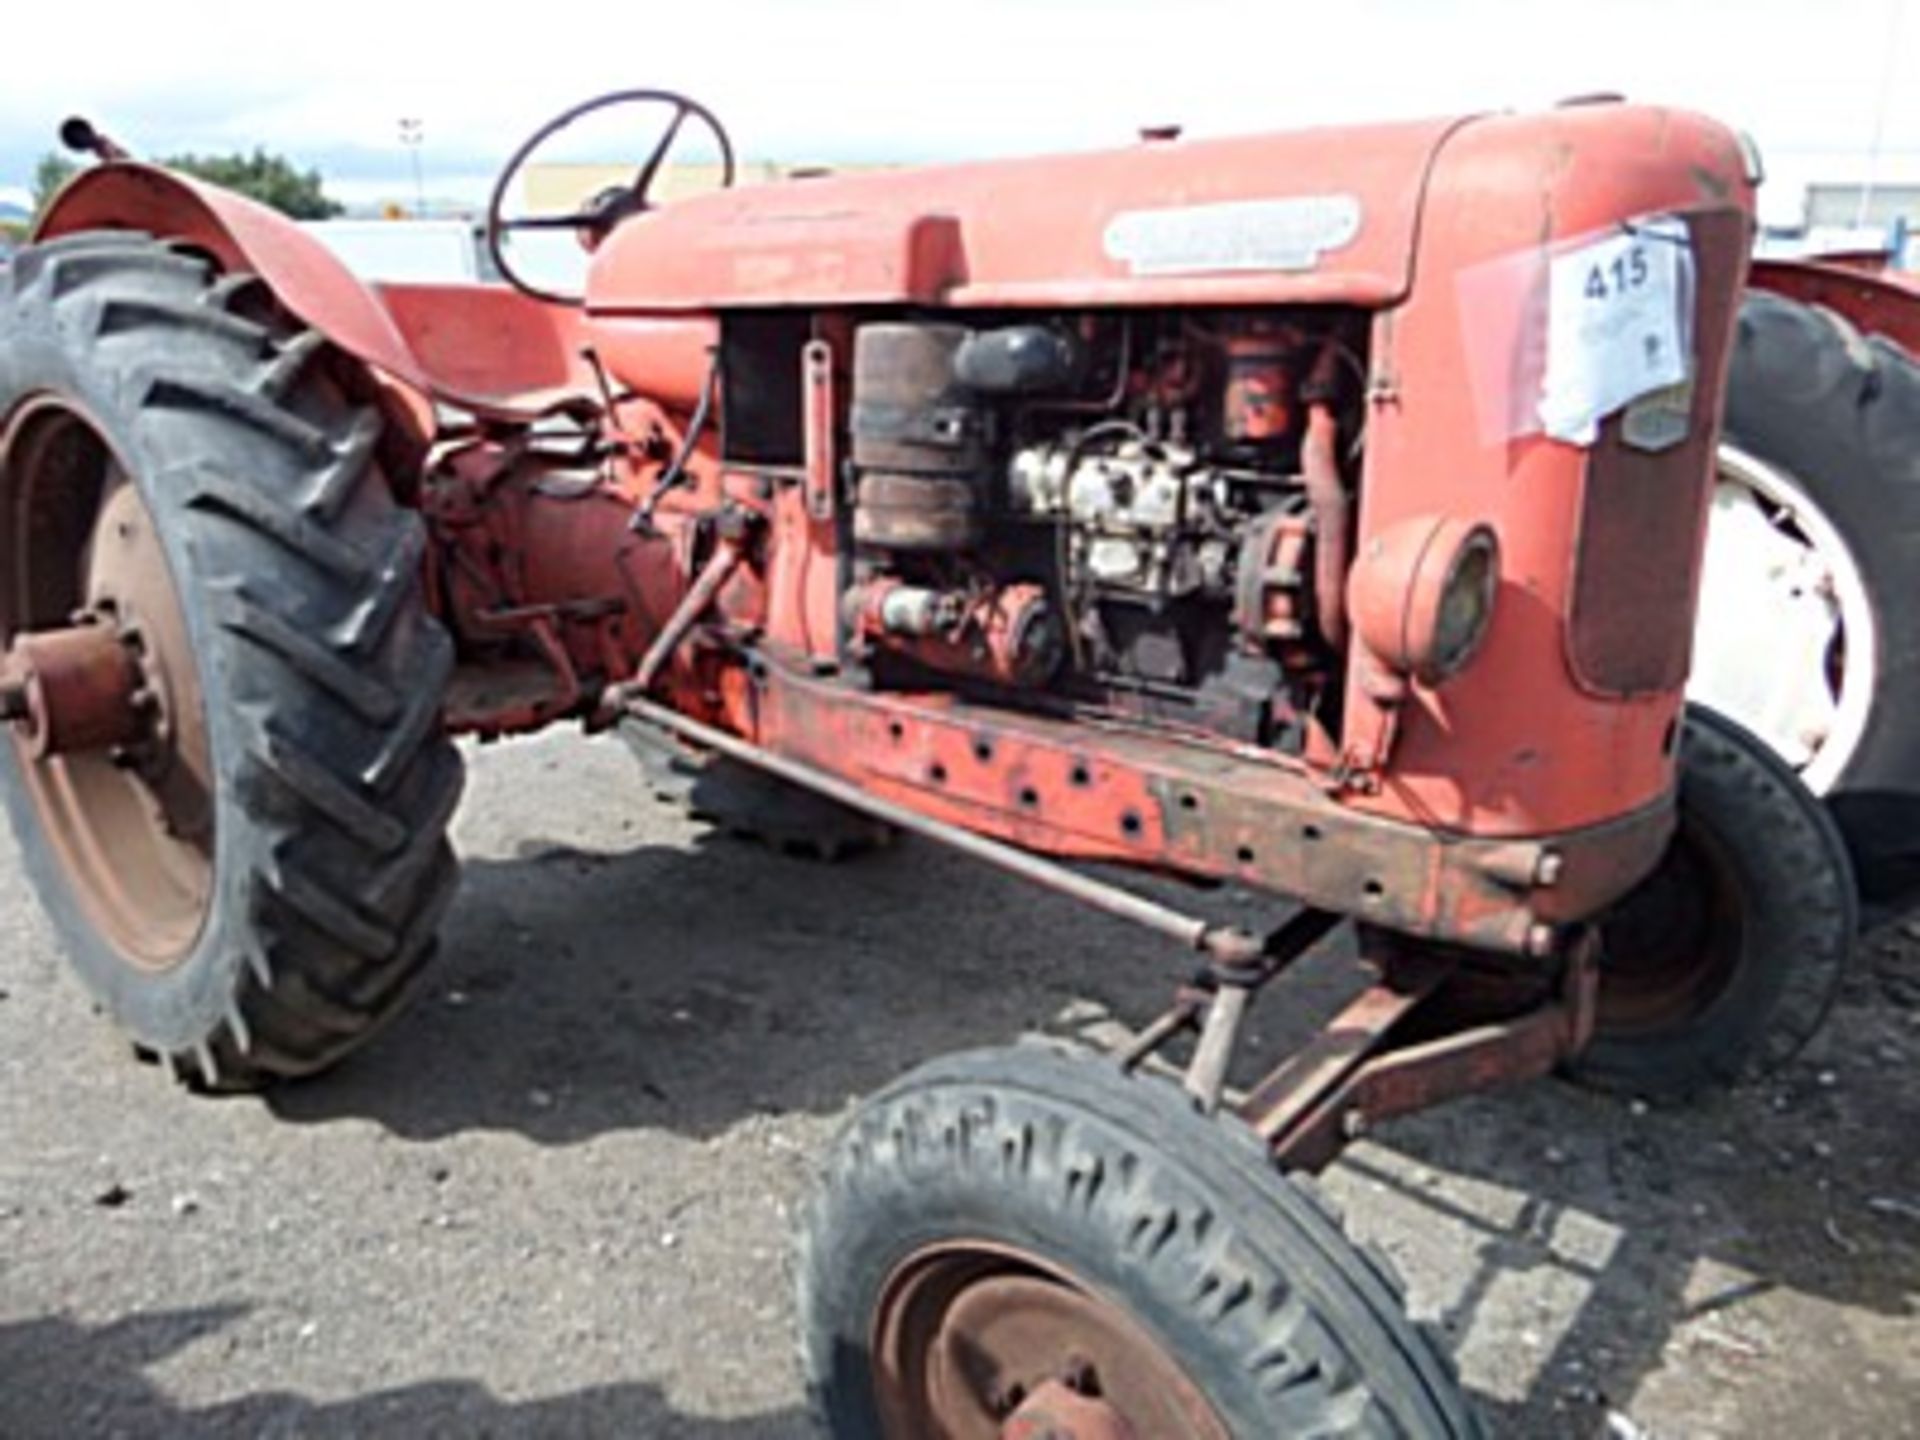 NUFFIELD, 4DM, Chassis number 4DM-792-4857 - we estimate this example to be circa 1961, the buyer